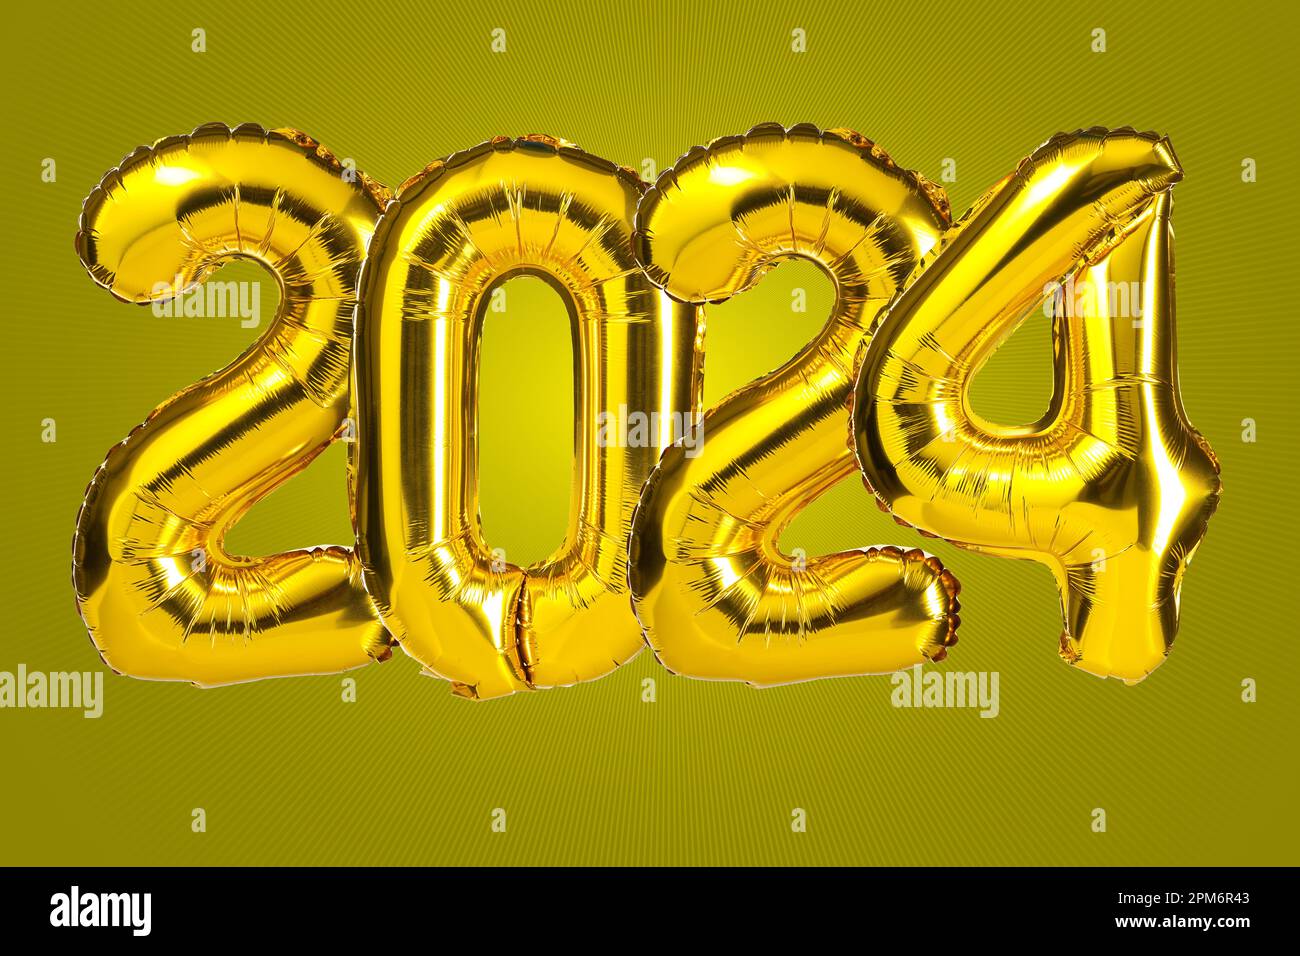 Happy New Year 2024] Happy New Year Giant Number 2024 Foil Balloons -  Rose Gold - Give Fun